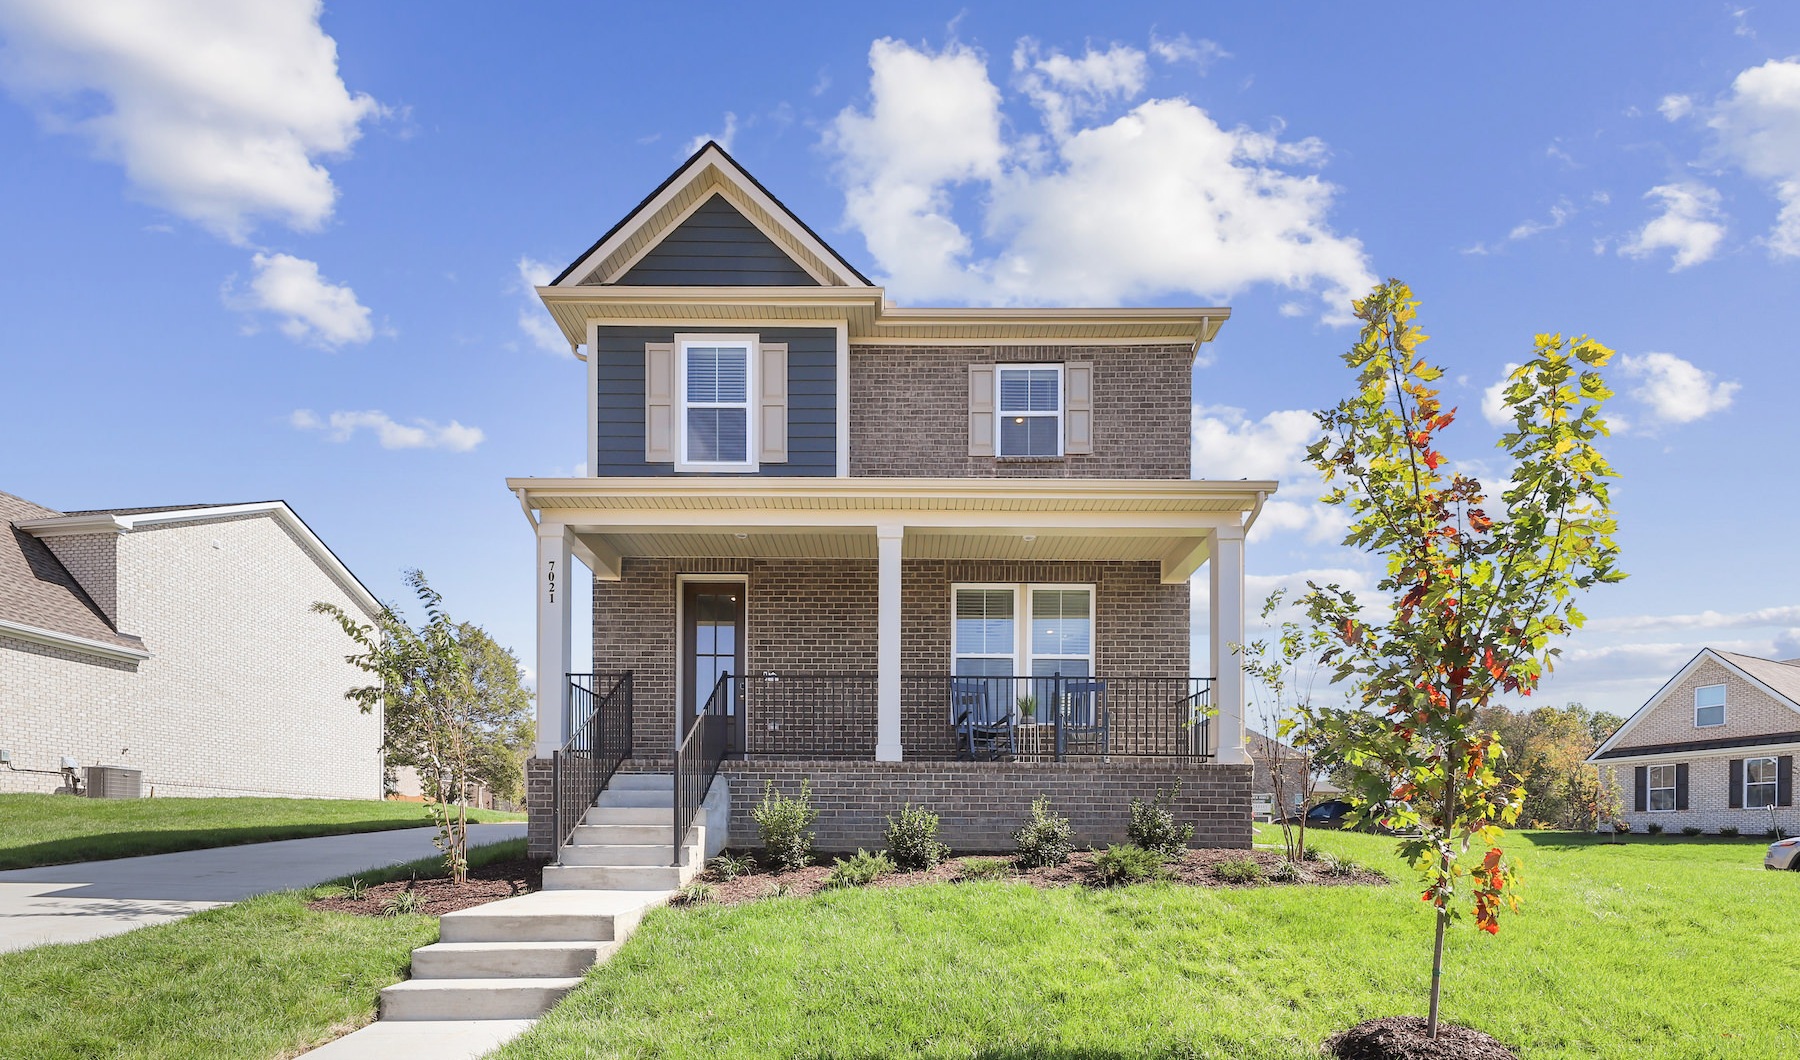 Exterior view of a single family home at Canvas at Mt. Juliet